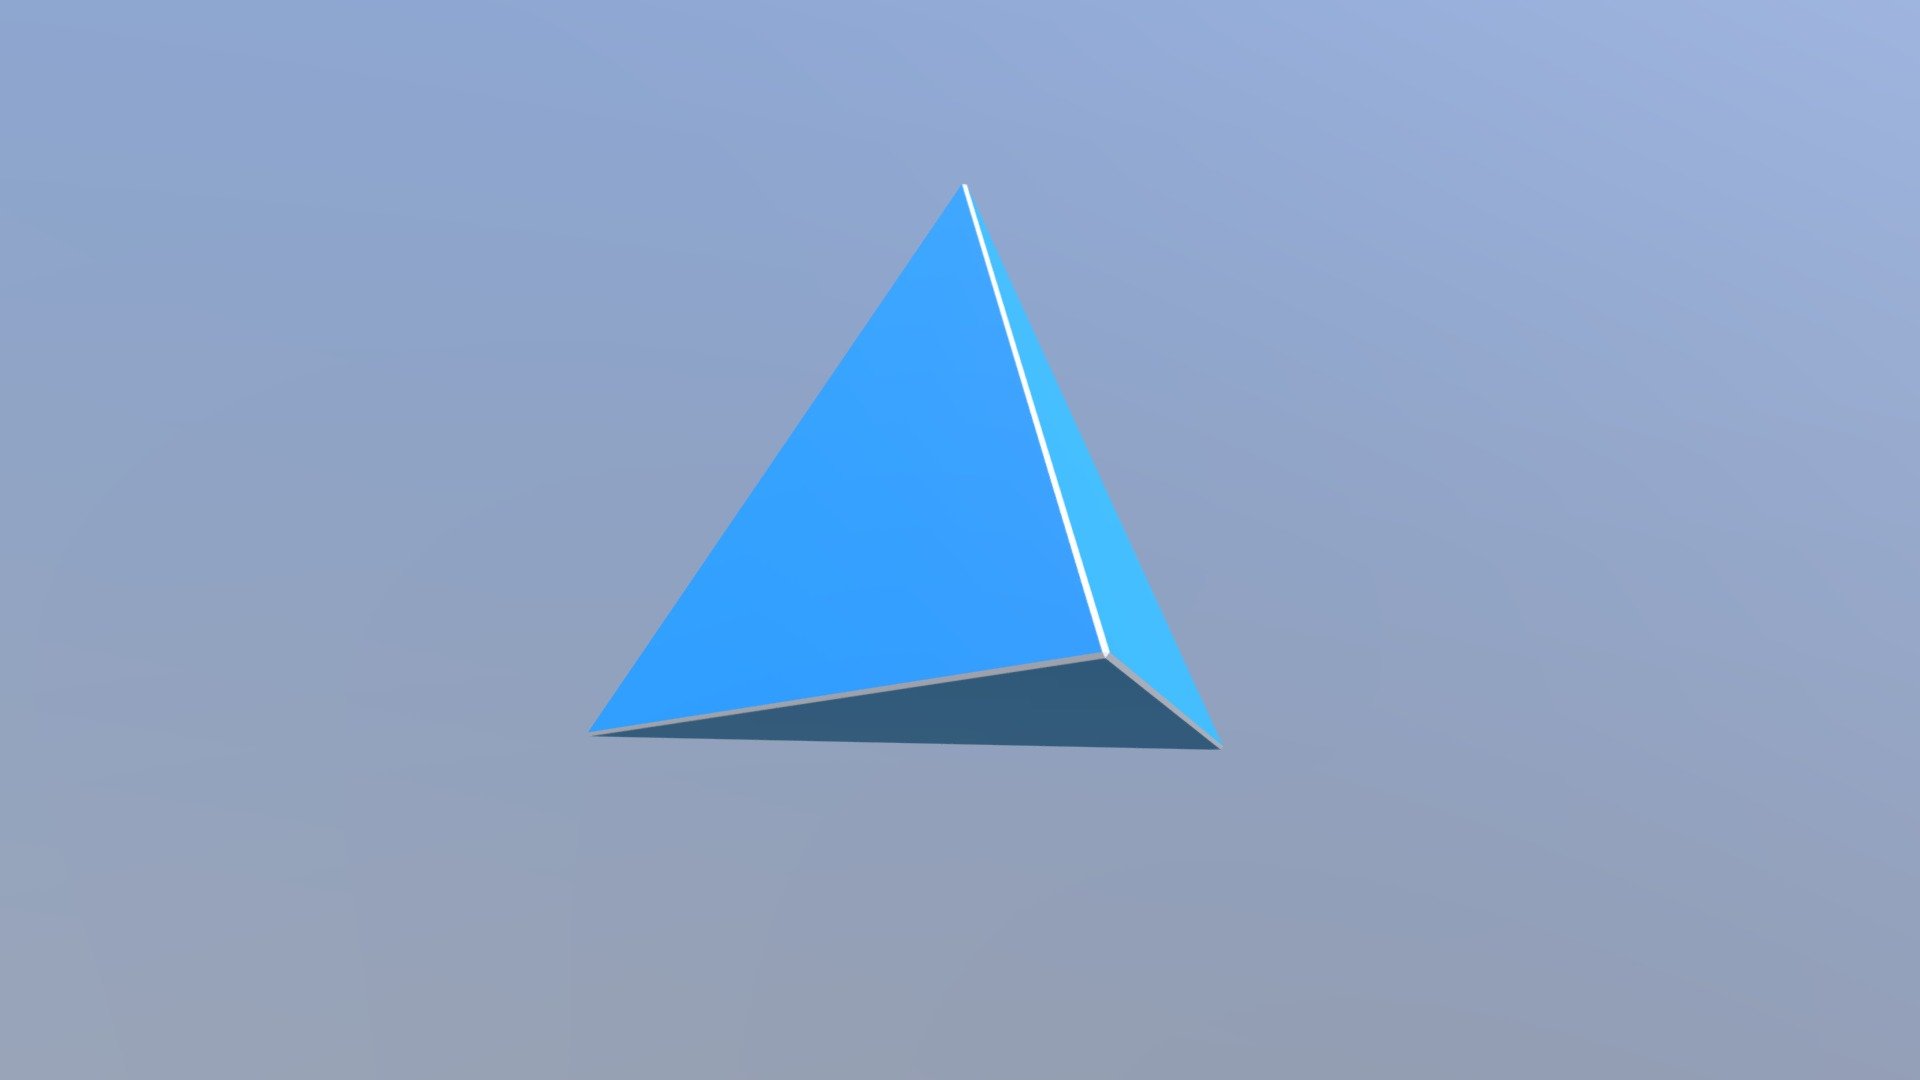 triangular prism with square base